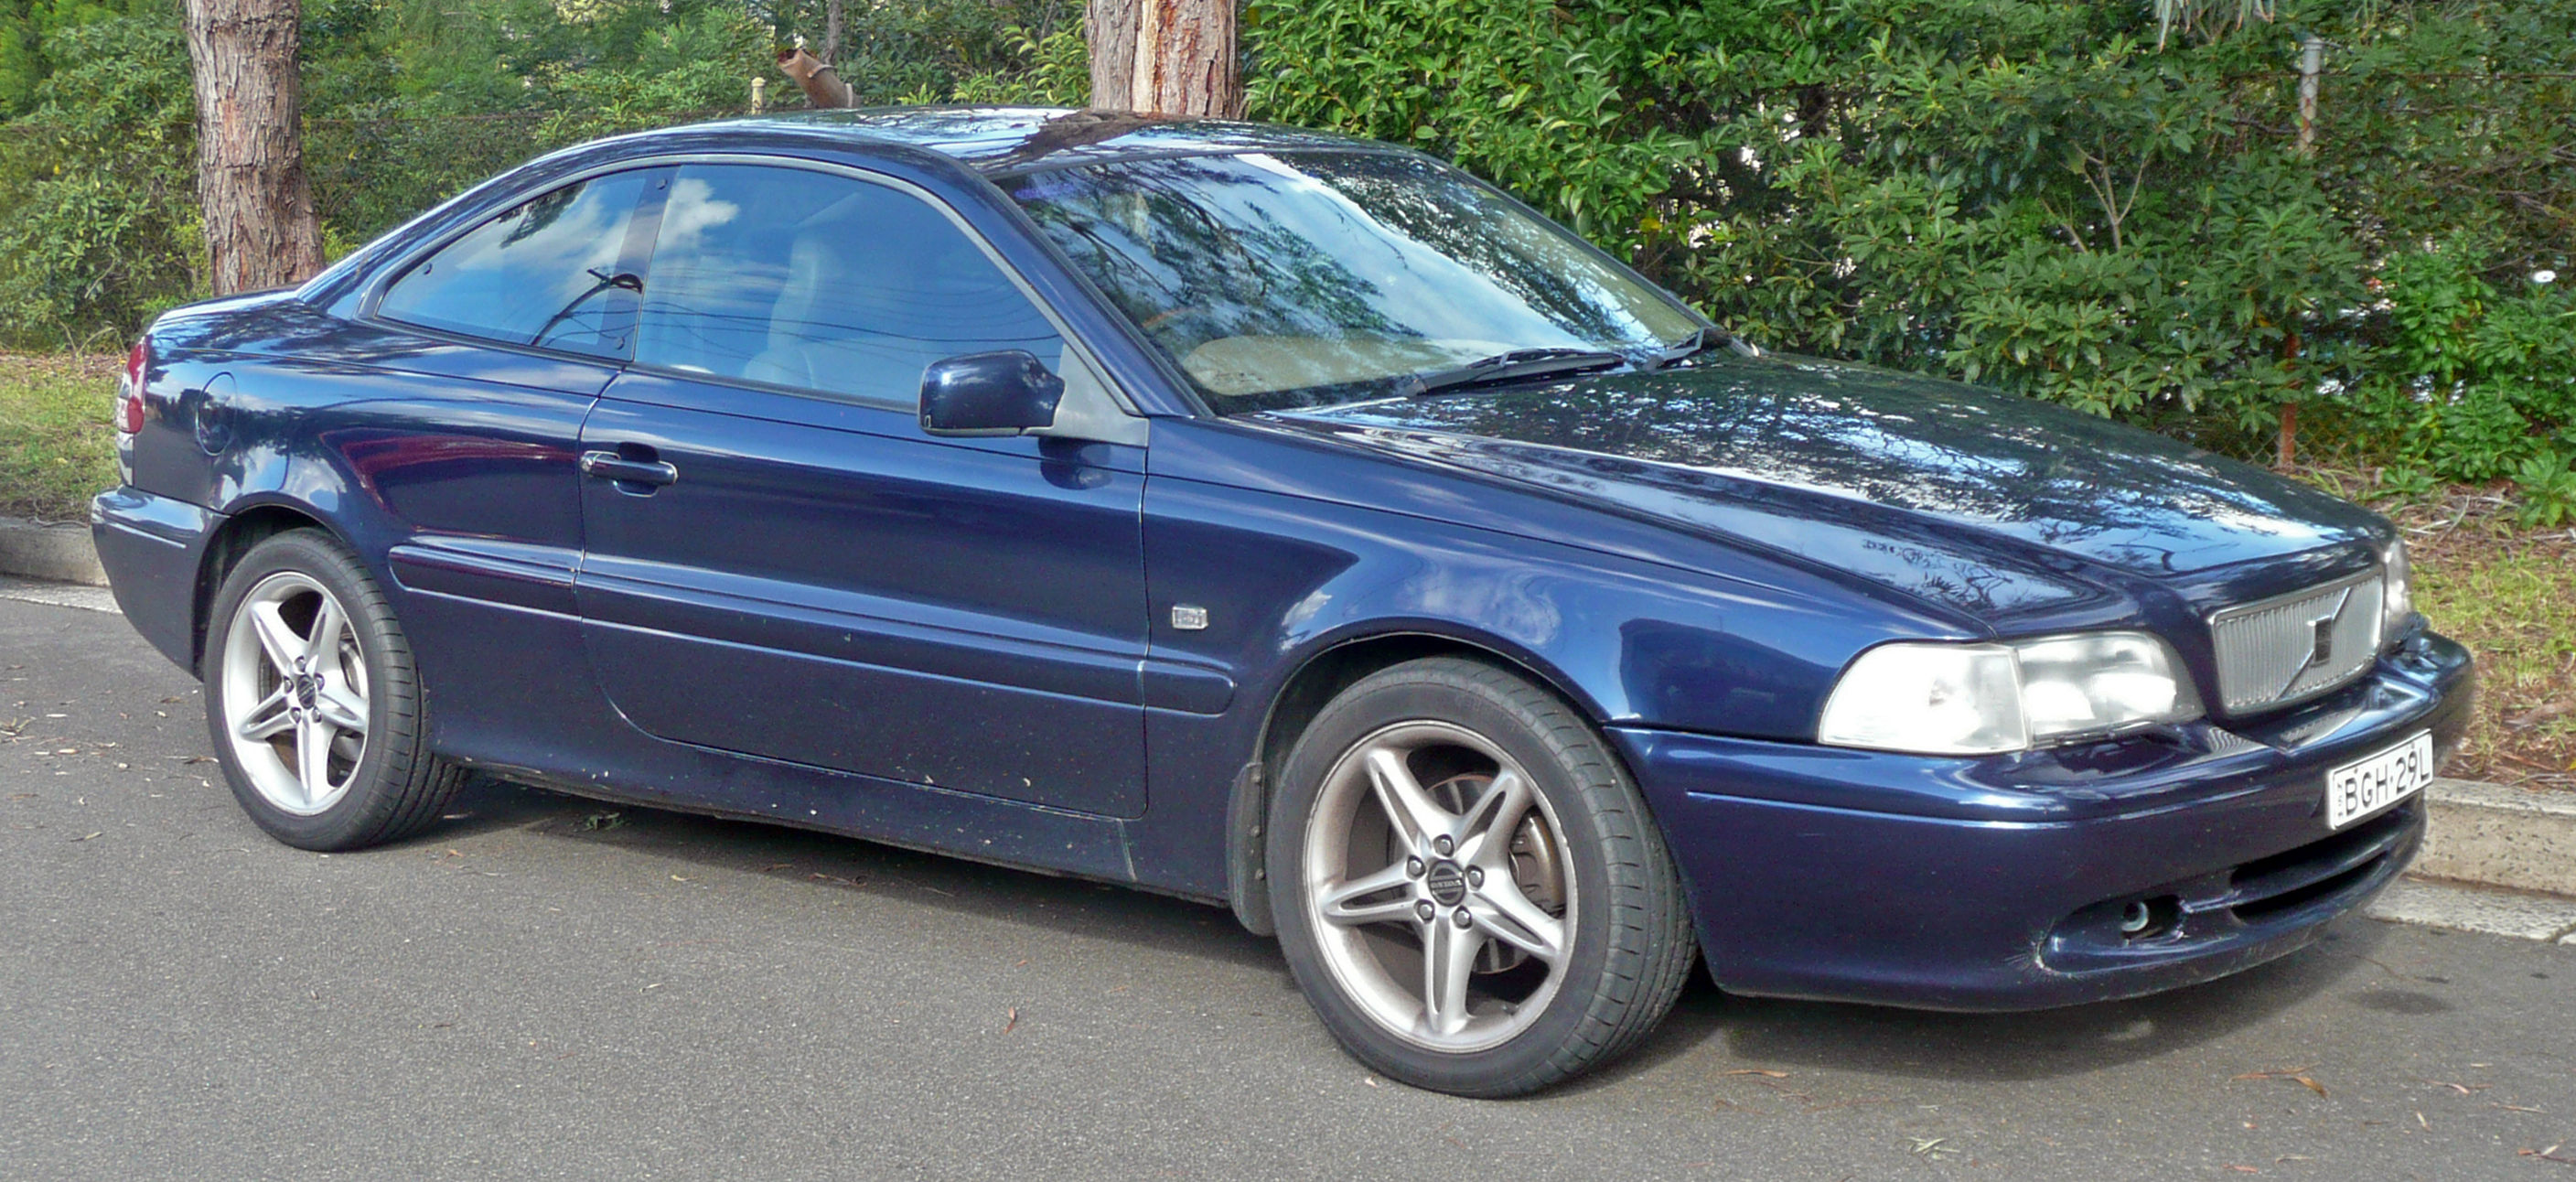 File:1998-2002 Volvo C70 coupe 01.jpg - Wikimedia Commons